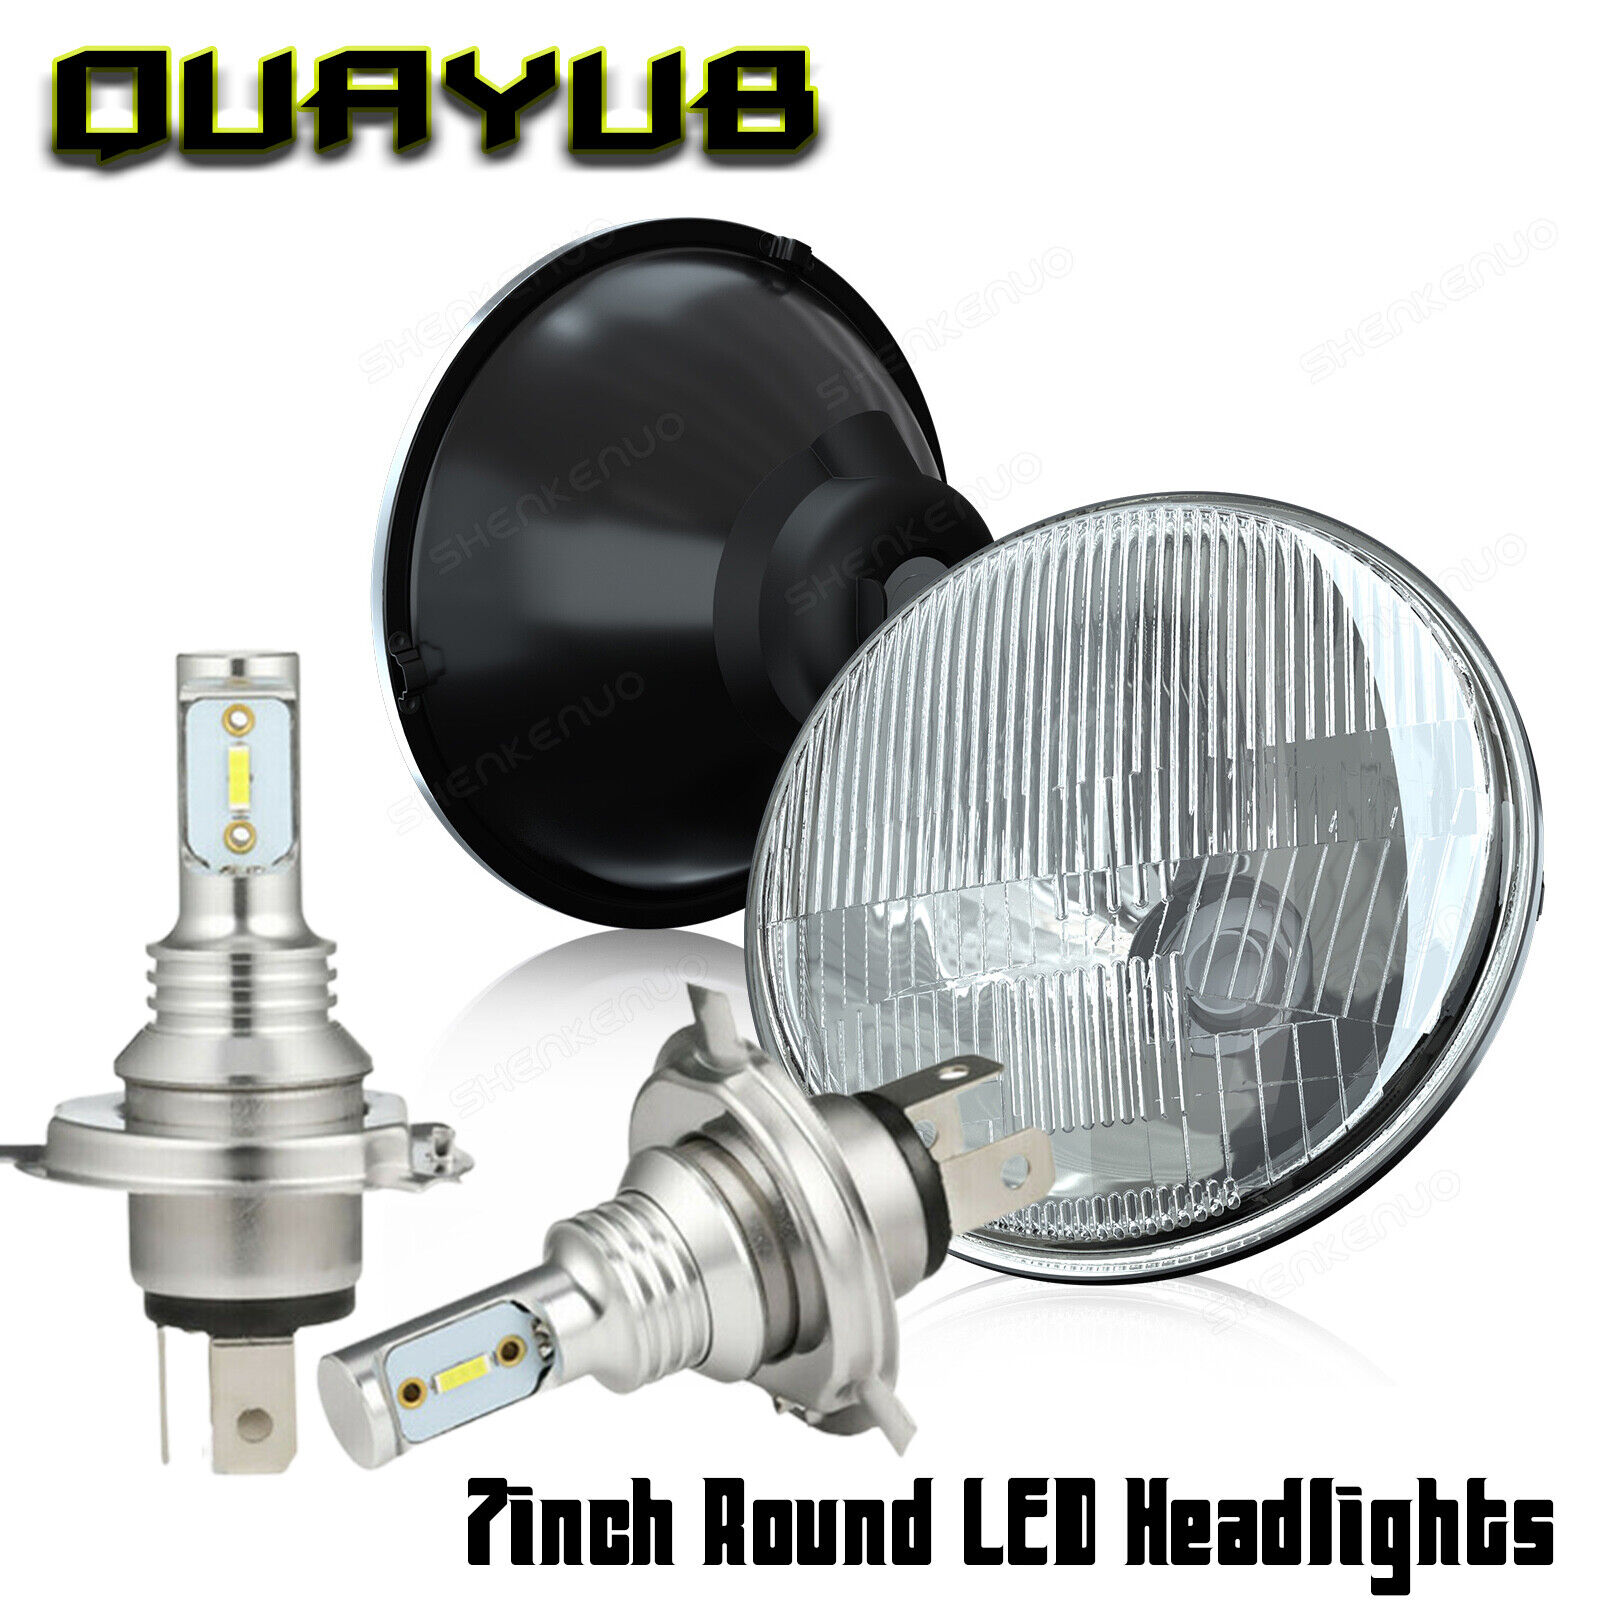 Pair 7 inch Round LED Hi/Lo Beam Headlights Bulbs for Ford F100 F150 F250 Truck